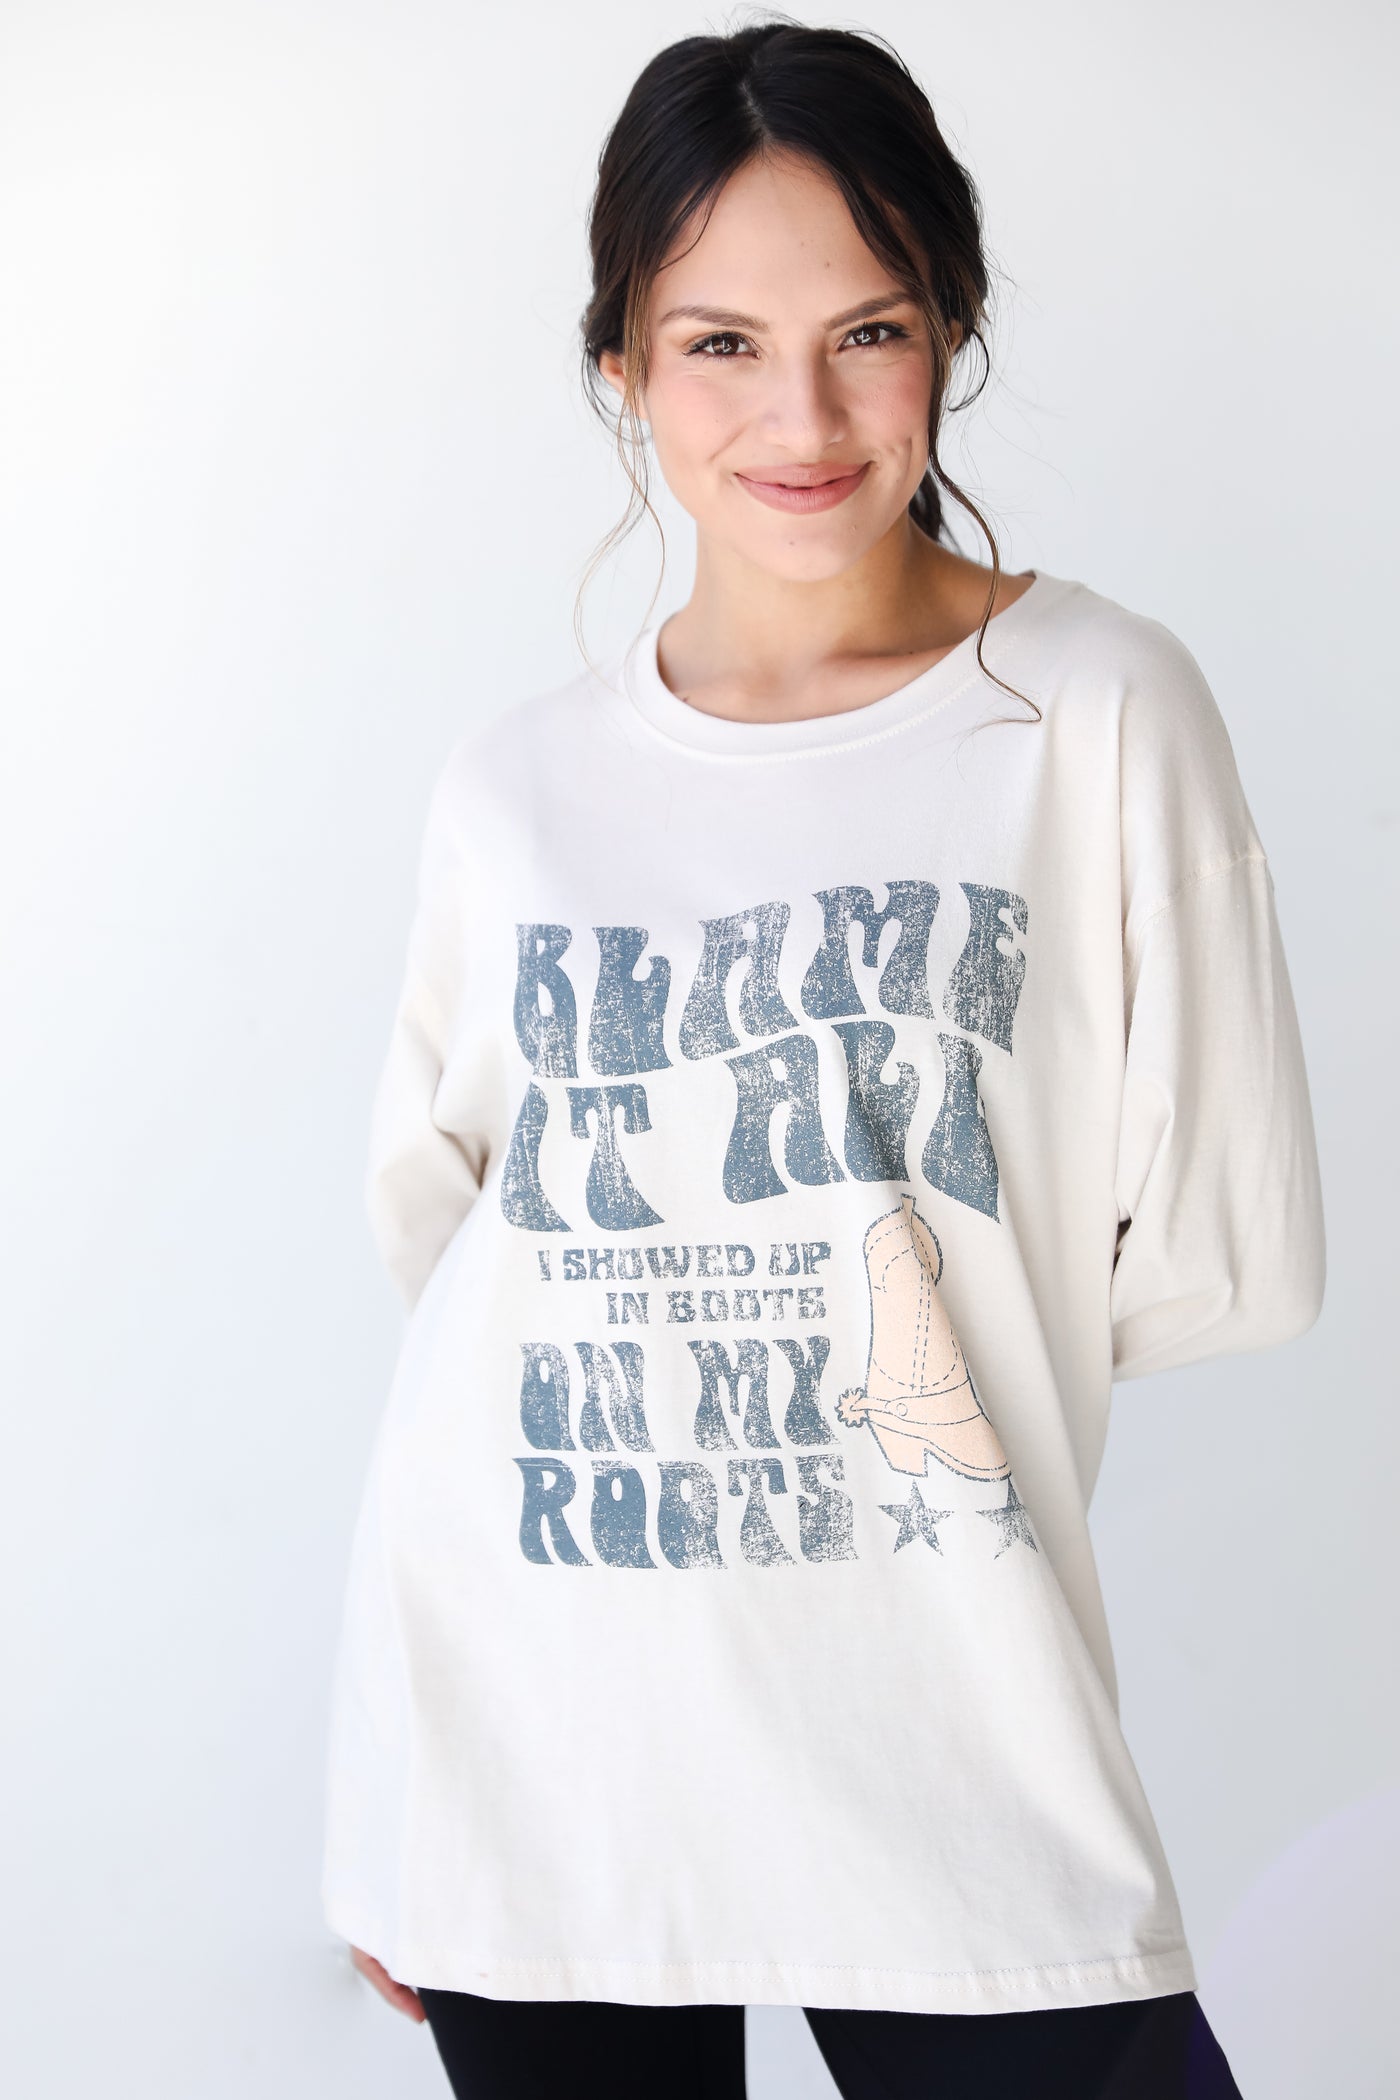 Blame It All On My Boots Long Sleeve Graphic Tee on model